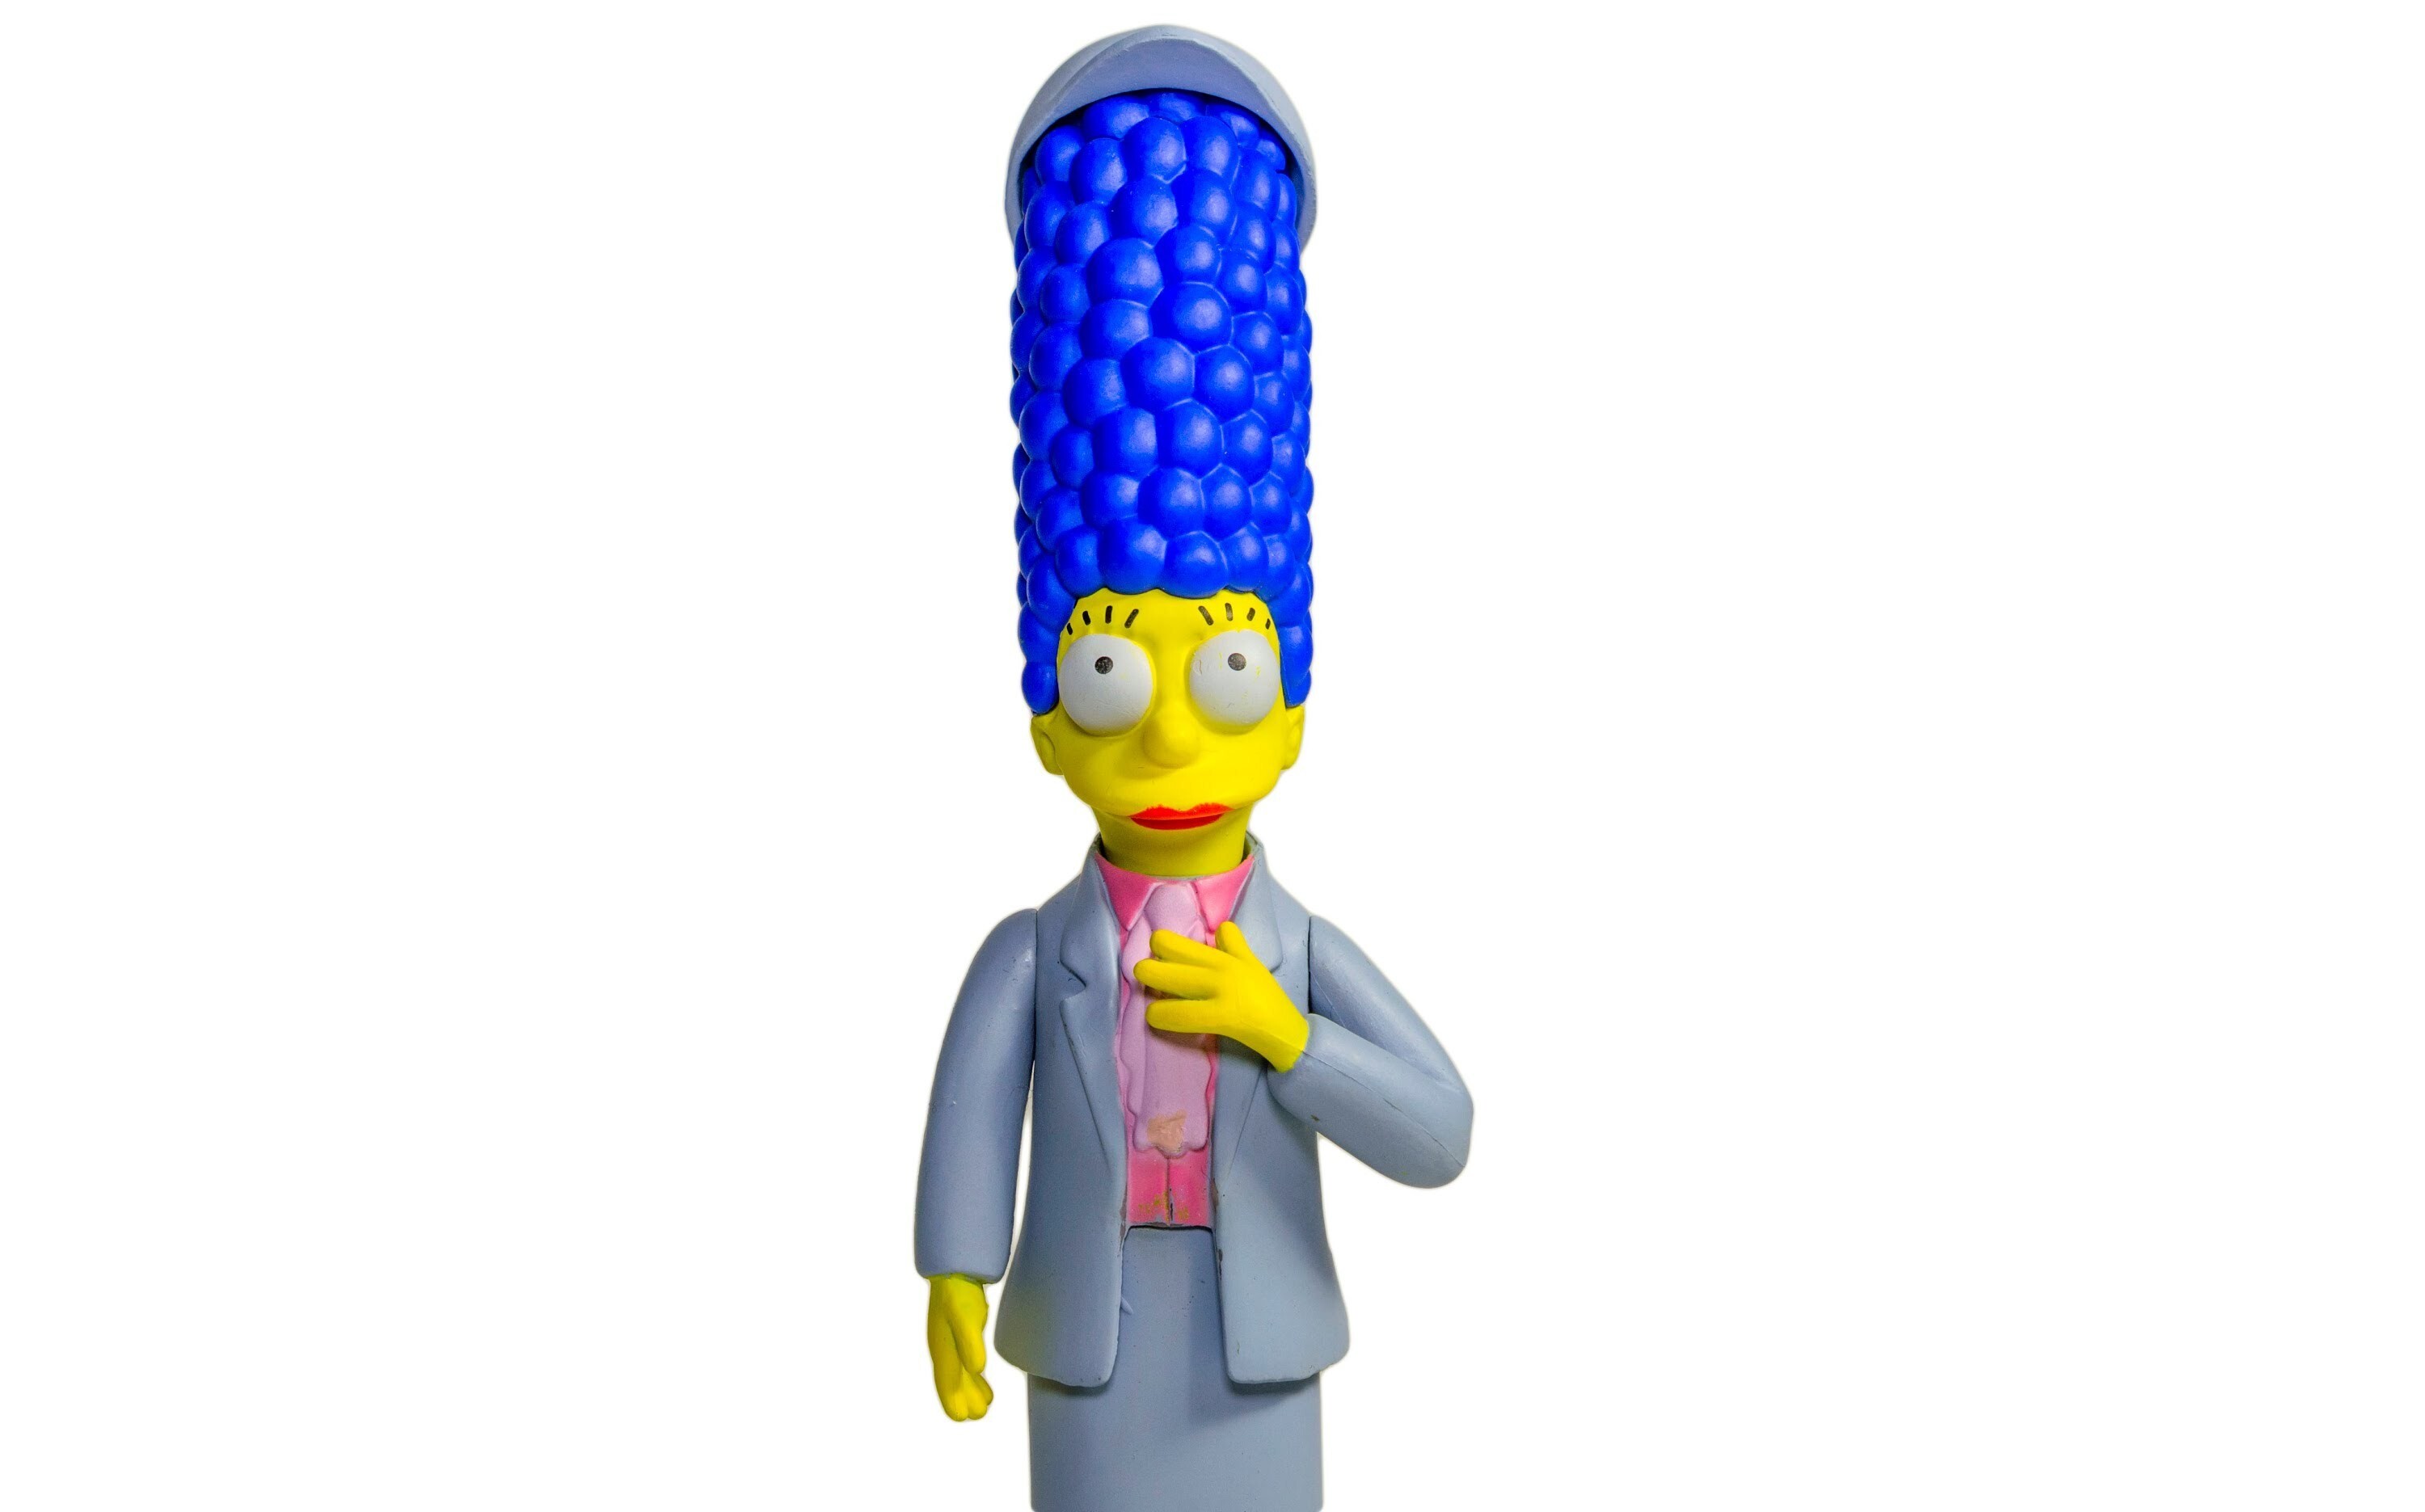 Marge Simpson Wallpapers